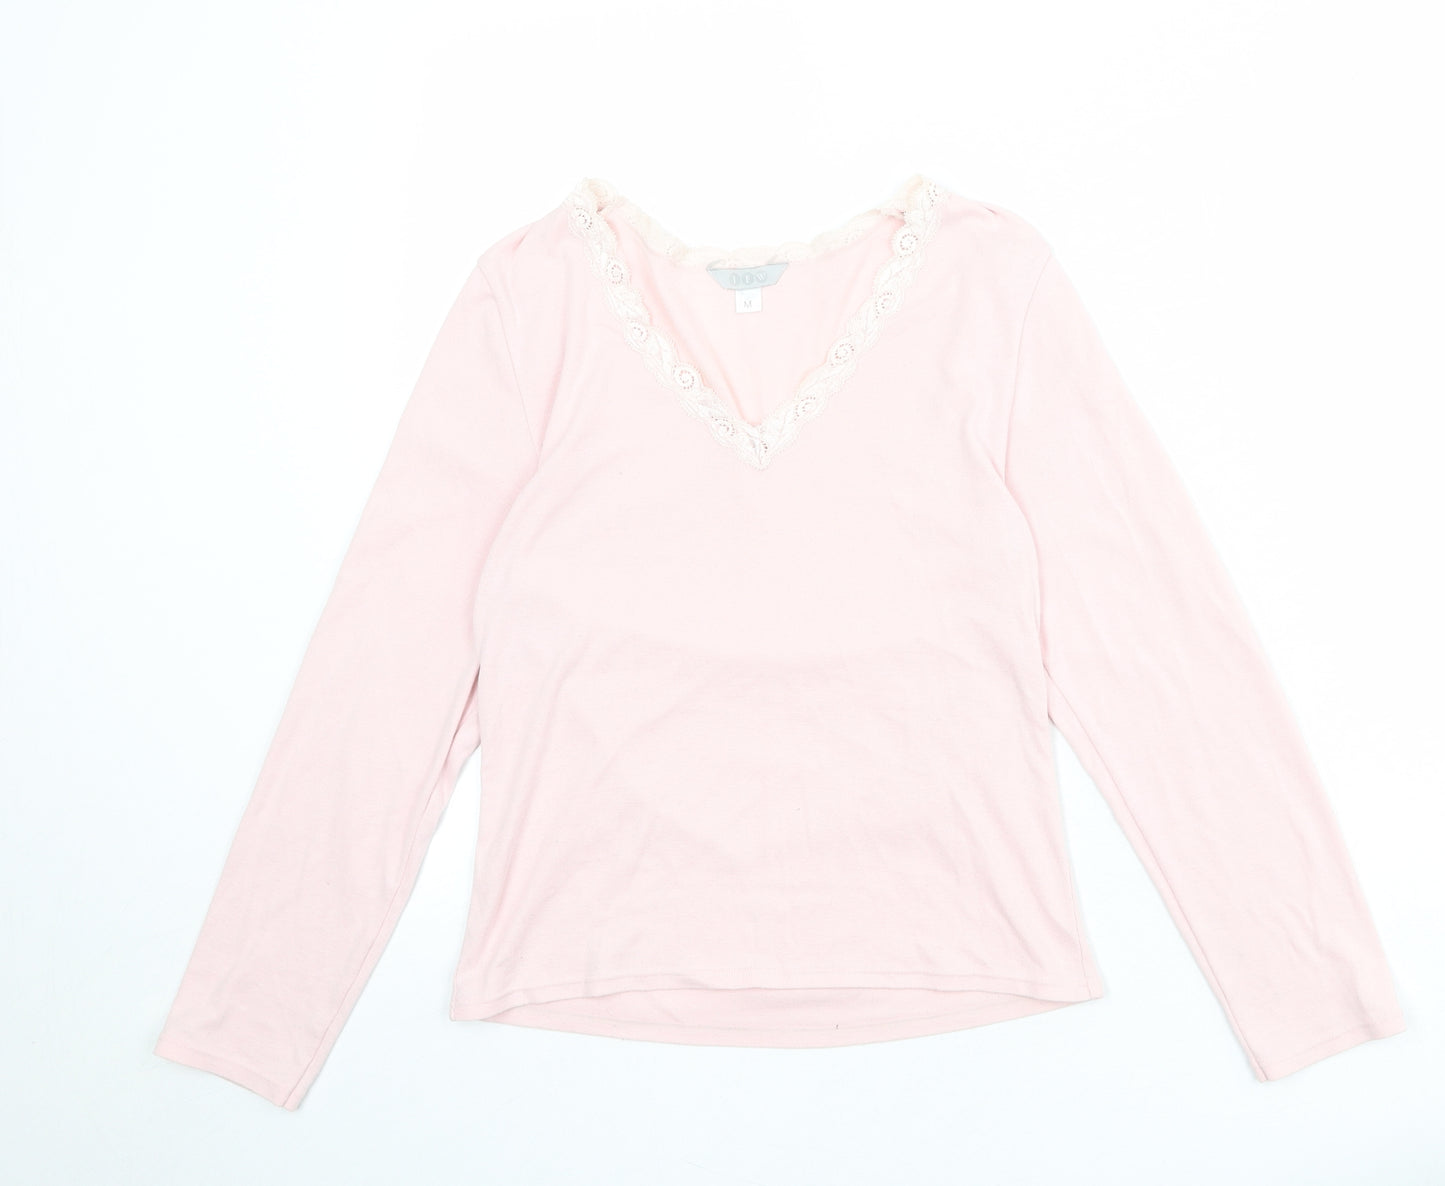 JFW Womens Pink Polyester Basic T-Shirt Size M V-Neck - Lace Details